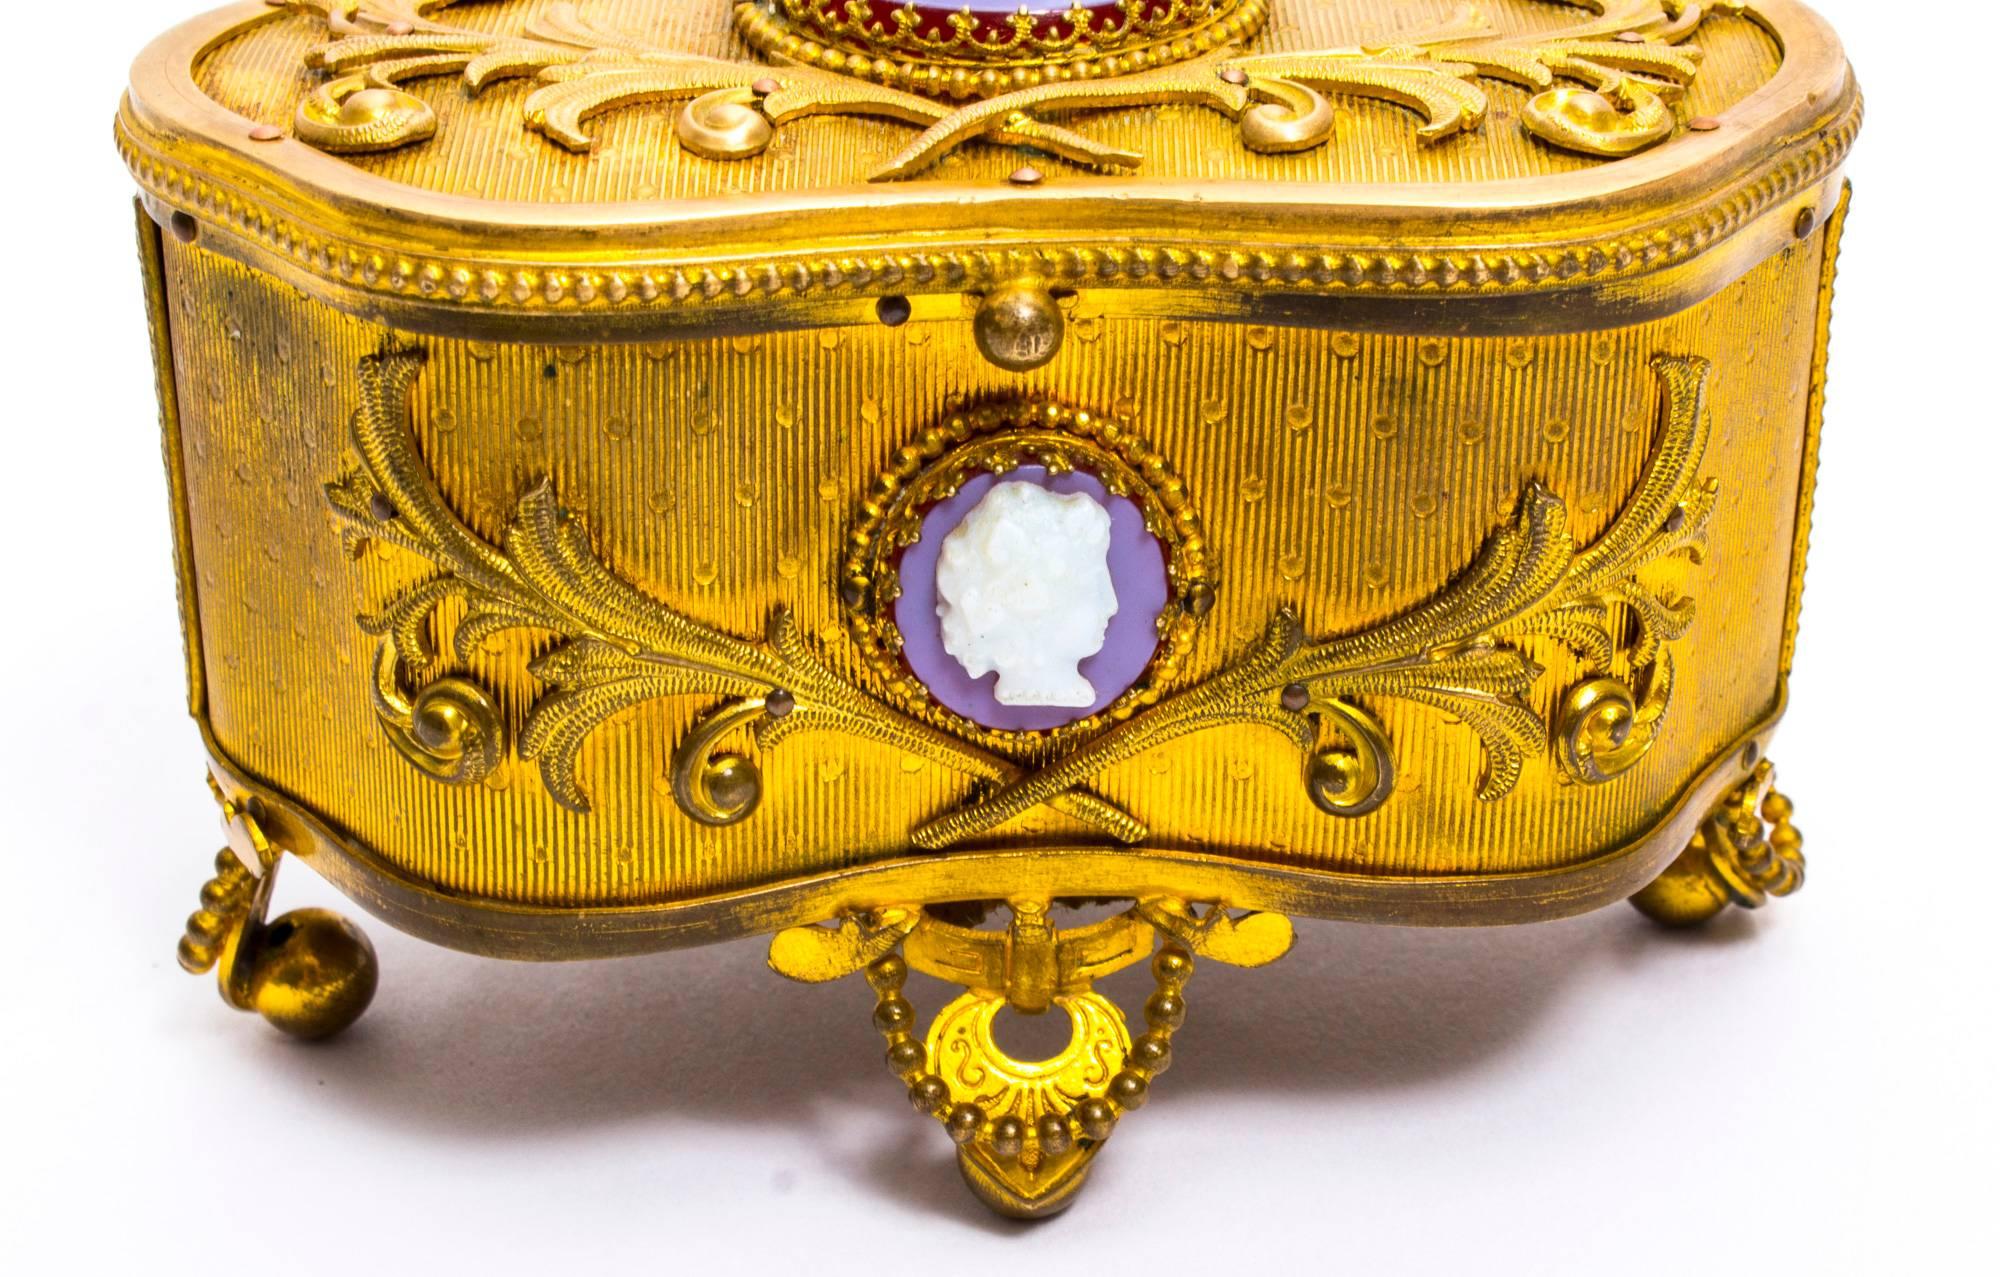 This is a beautiful antique French Napoleon III gilded ormolu Jewelry casket, circa 1860 in date.

The top, front, sides and back are beautifully cast and tooled in gilt bronze with superb foliate decoration and it is further decorated with three